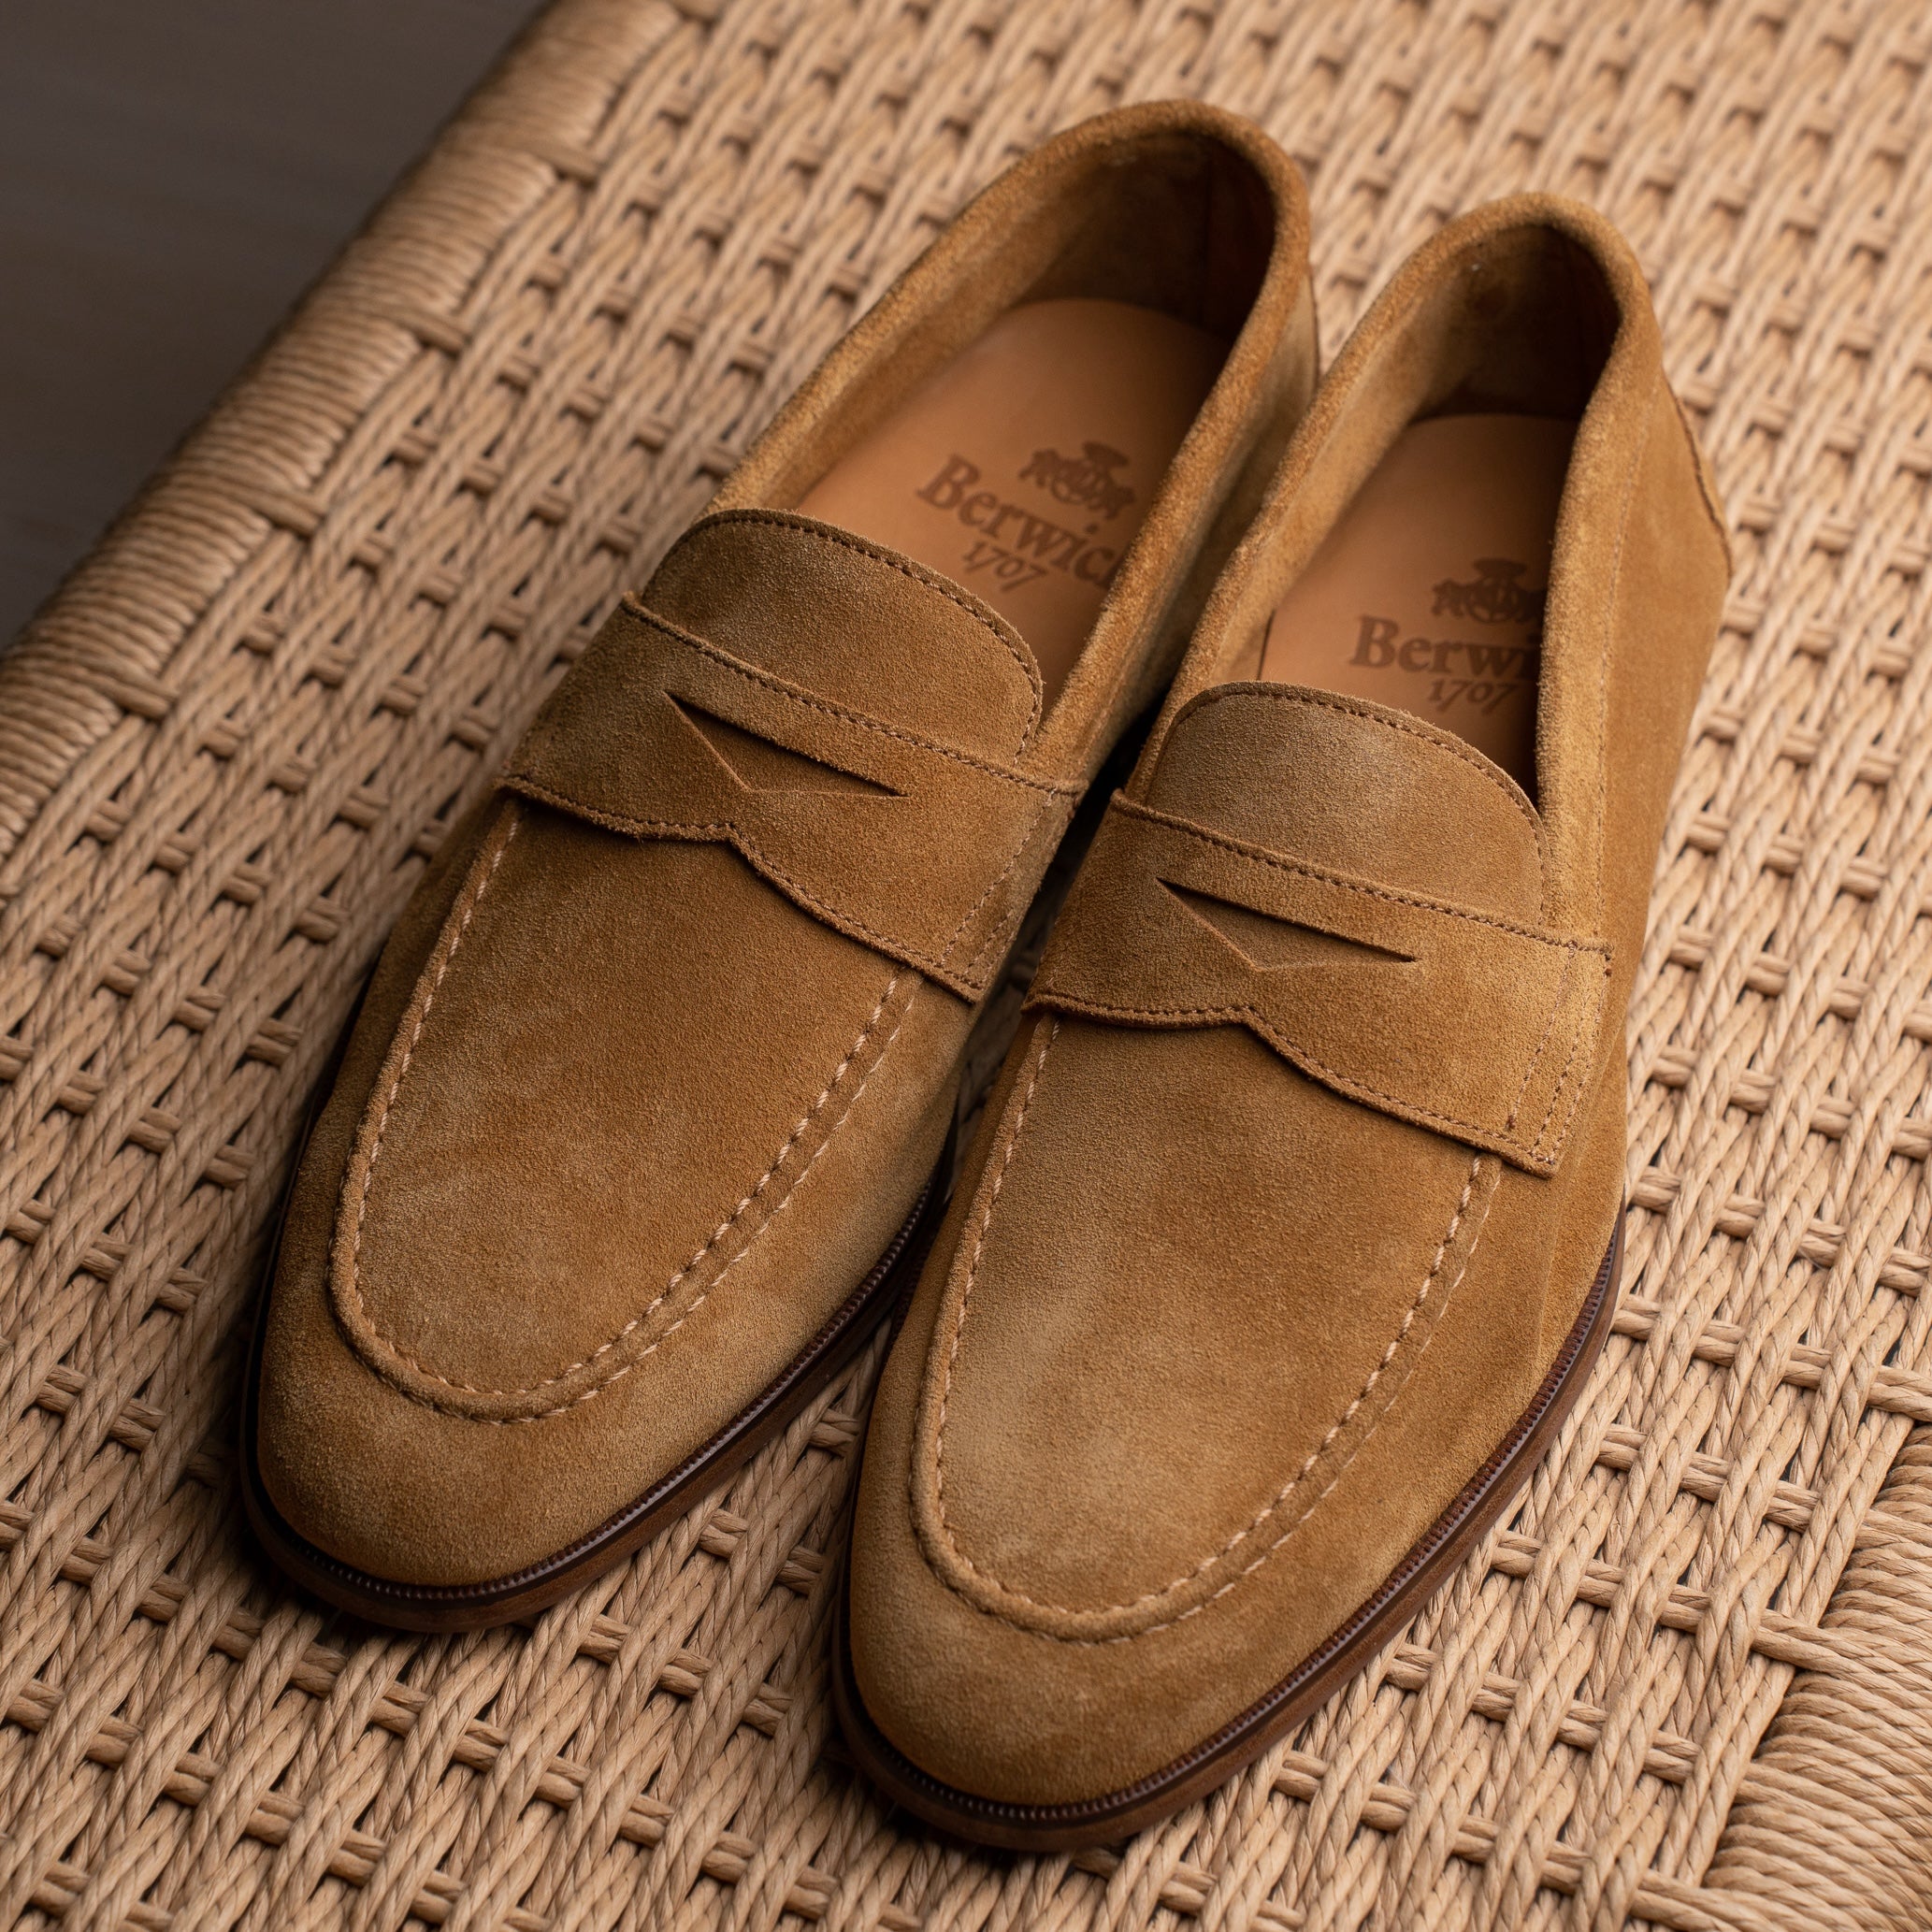 Unlined Penny Loafer - Golden Brown Suede